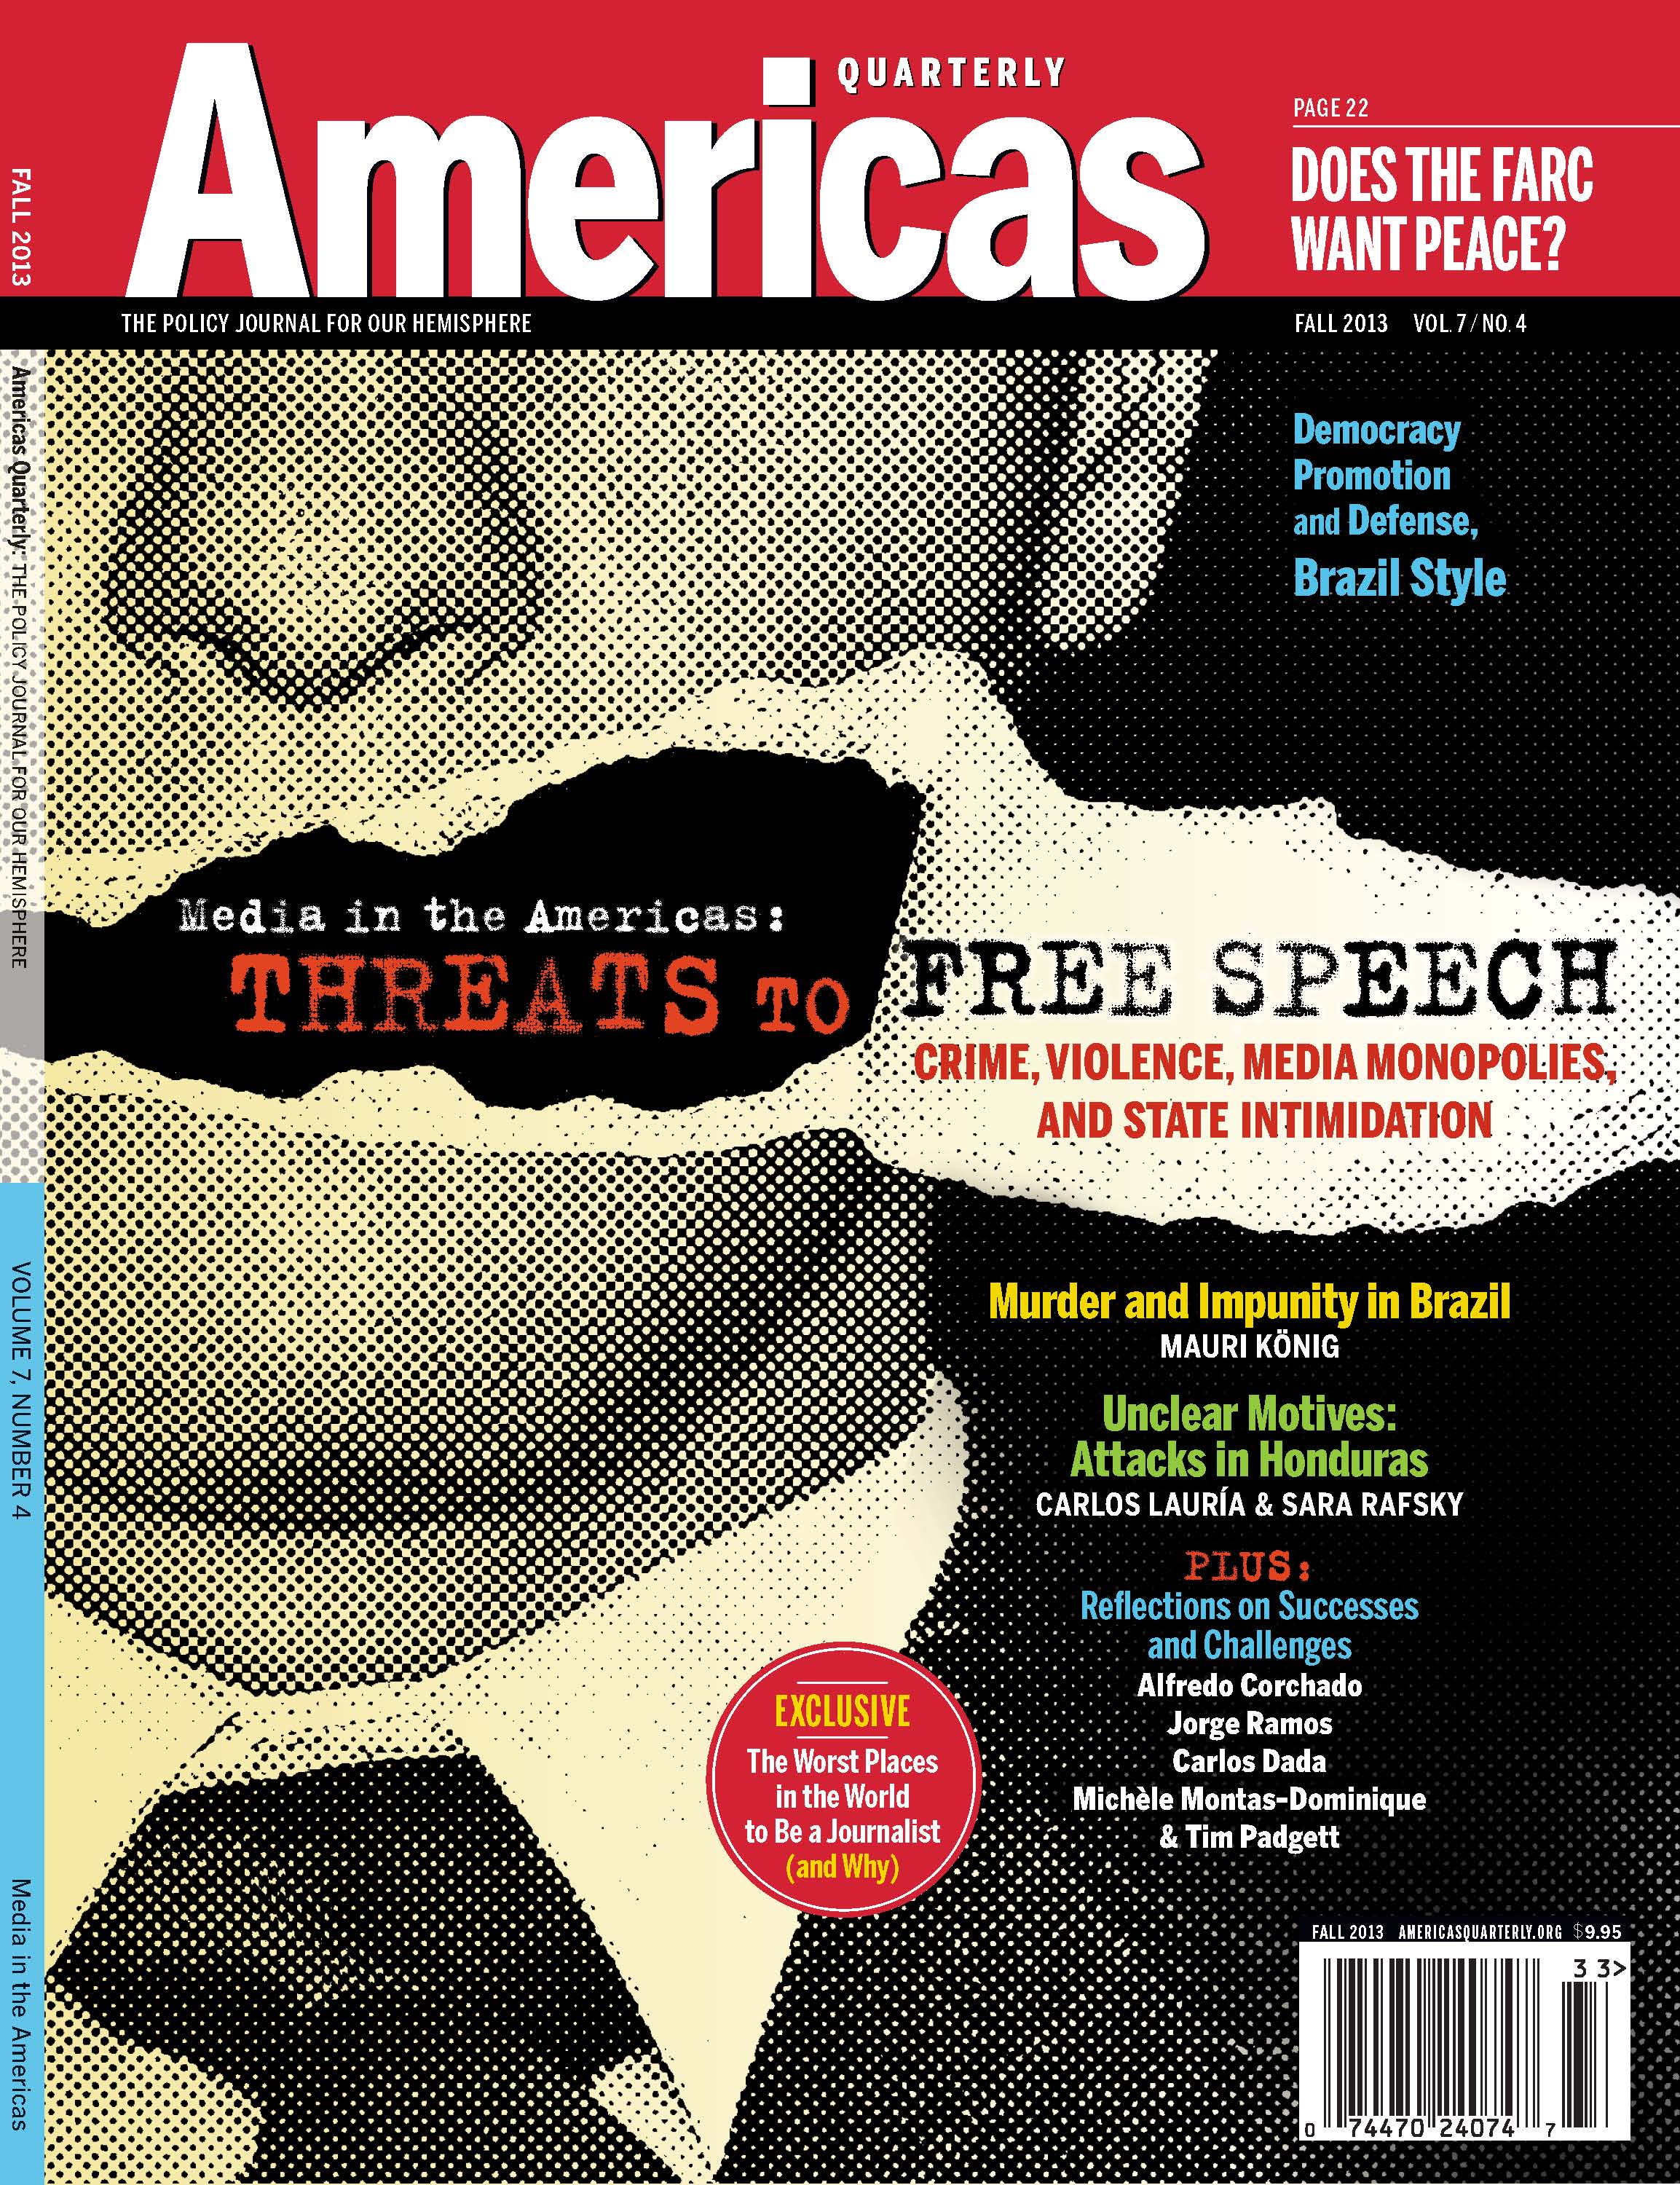 America's Quarterly-Fall, "Freedom of Expression in the Americas"